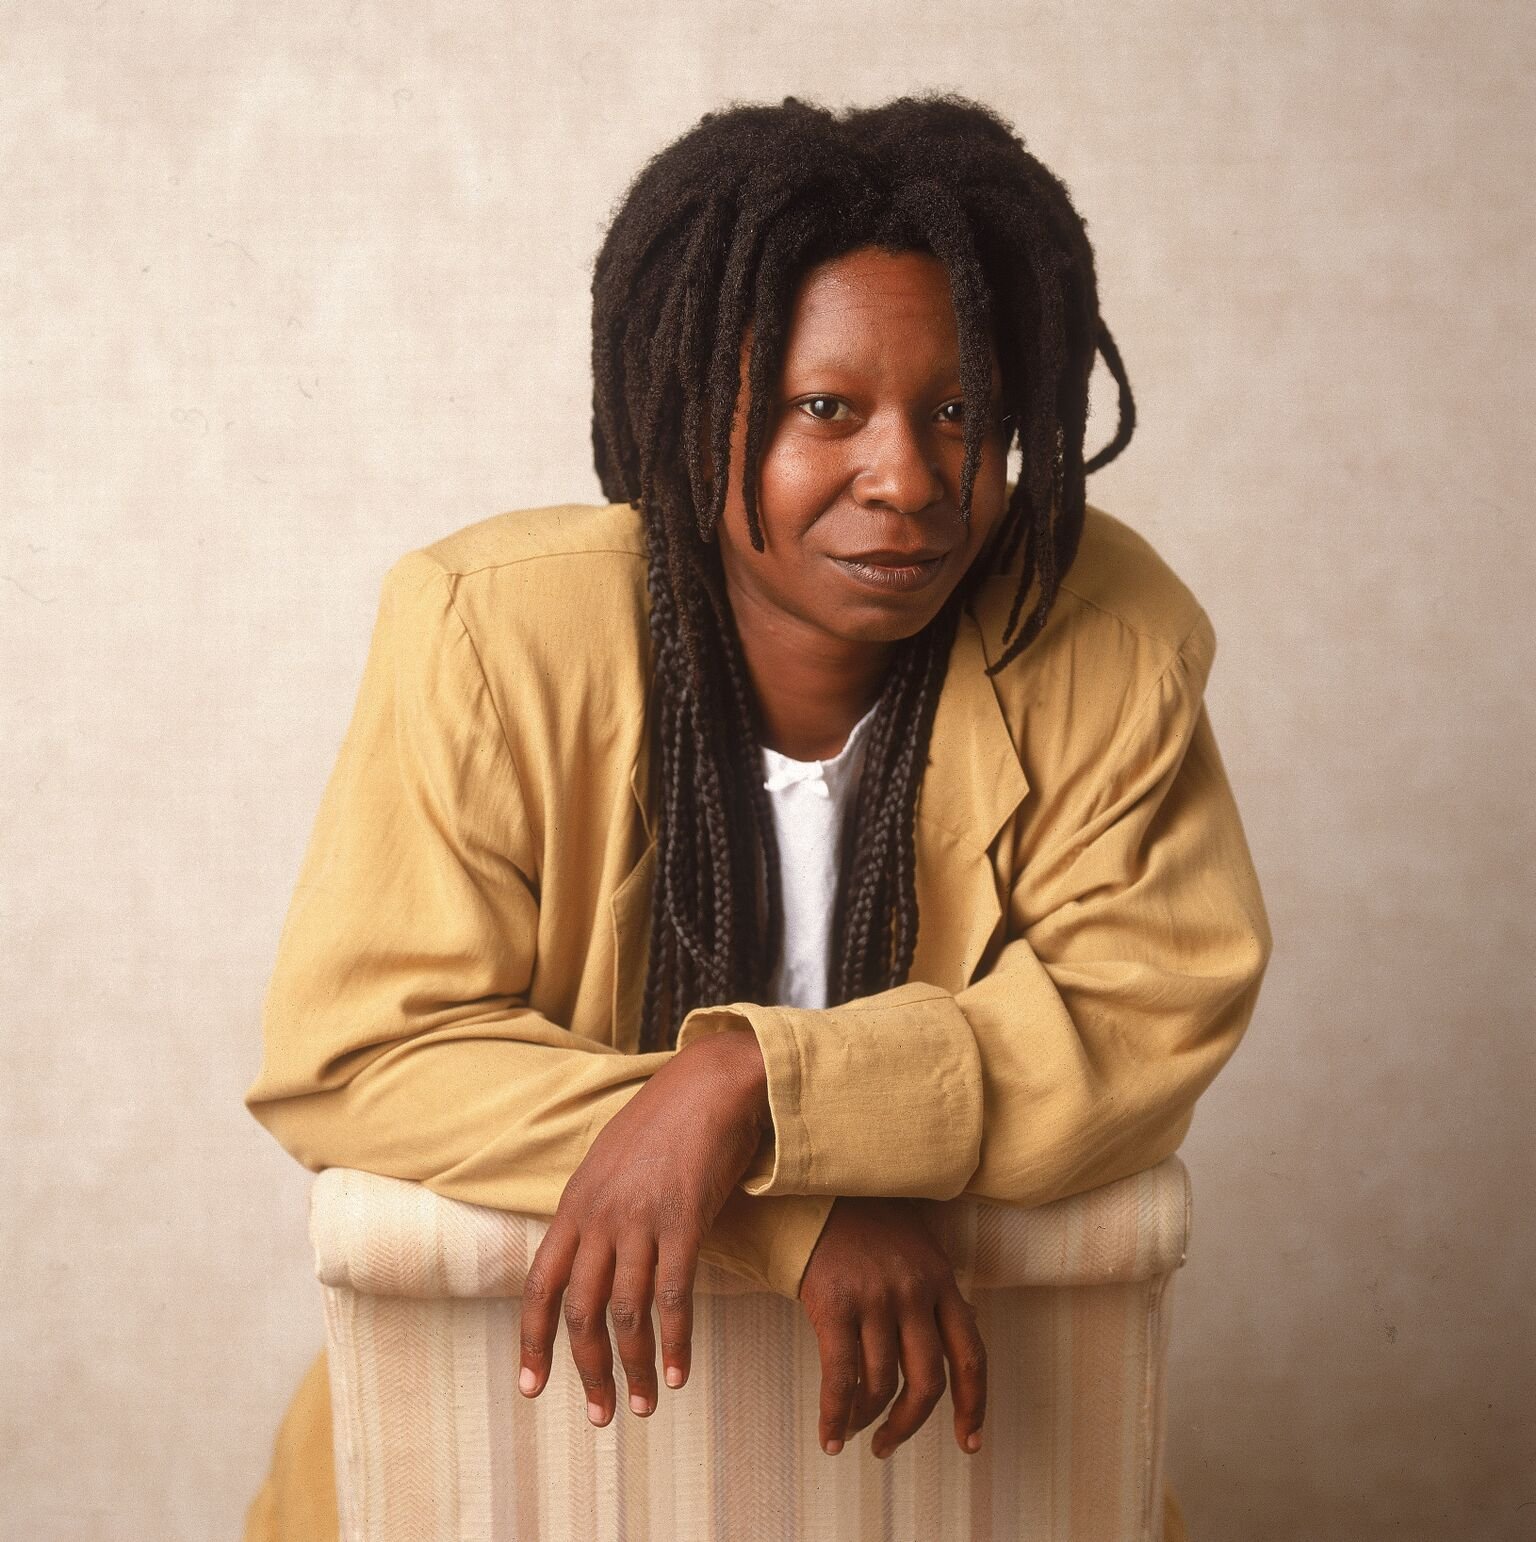  American actor and comedian Whoopi Goldberg leaning on a chair, 1988 | Getty Images